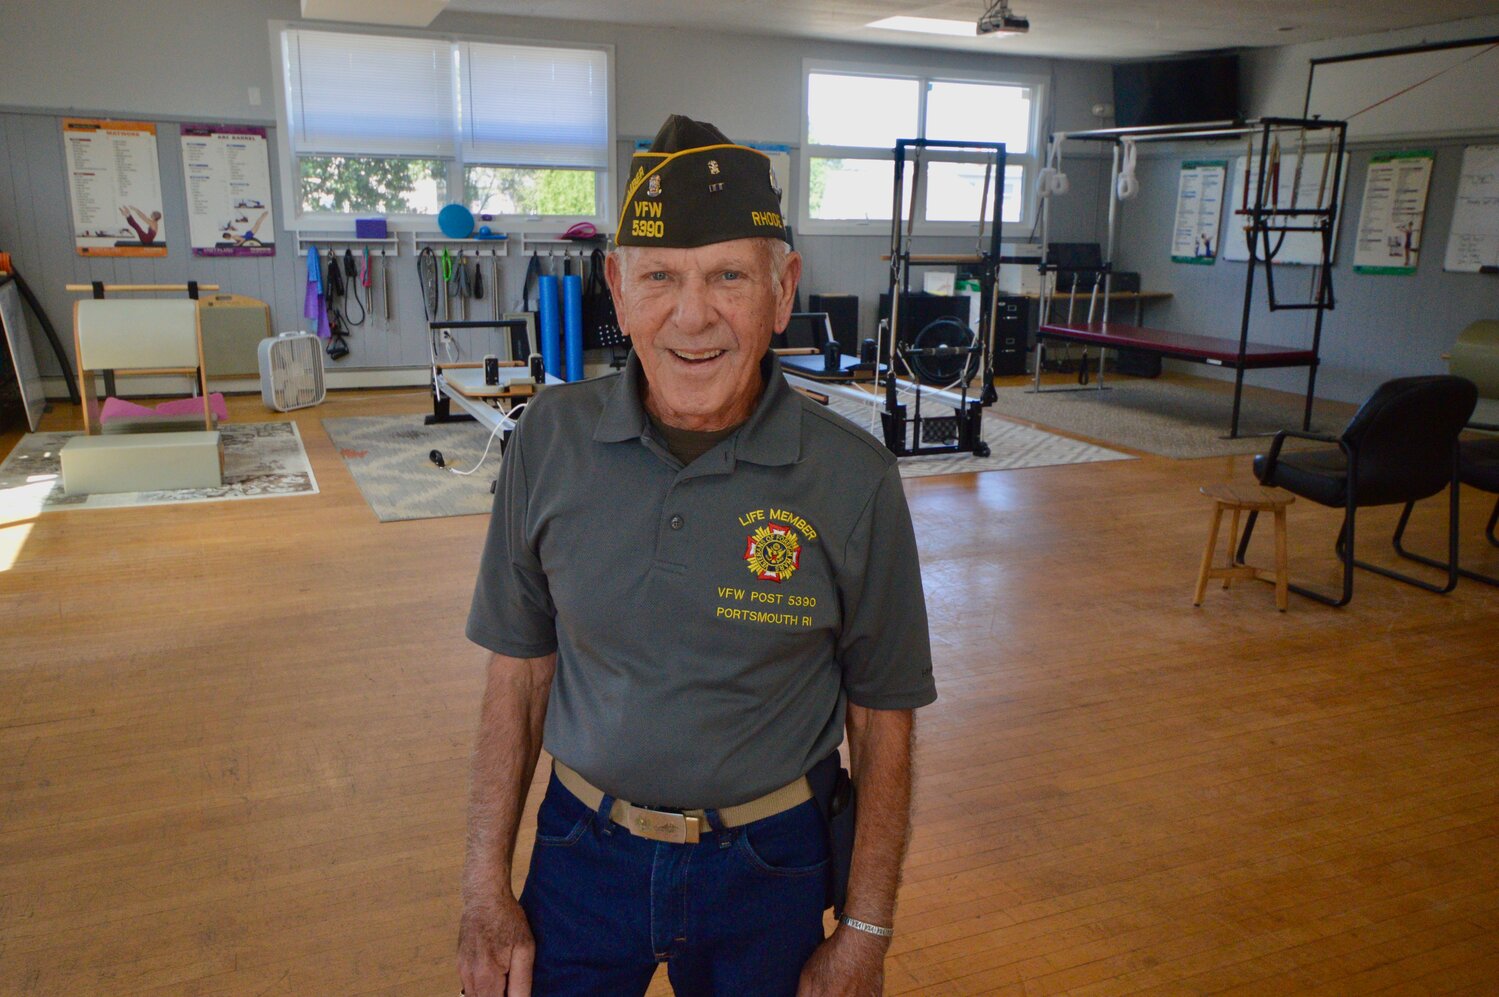 Ken Rutter, commander of VFW Post 5390 in Common Fence Point, stands inside the top floor of the hall, which is undergoing a transformation. Behind him are pilates equipment used in classes led by Conley Zani, who rents space in the building.